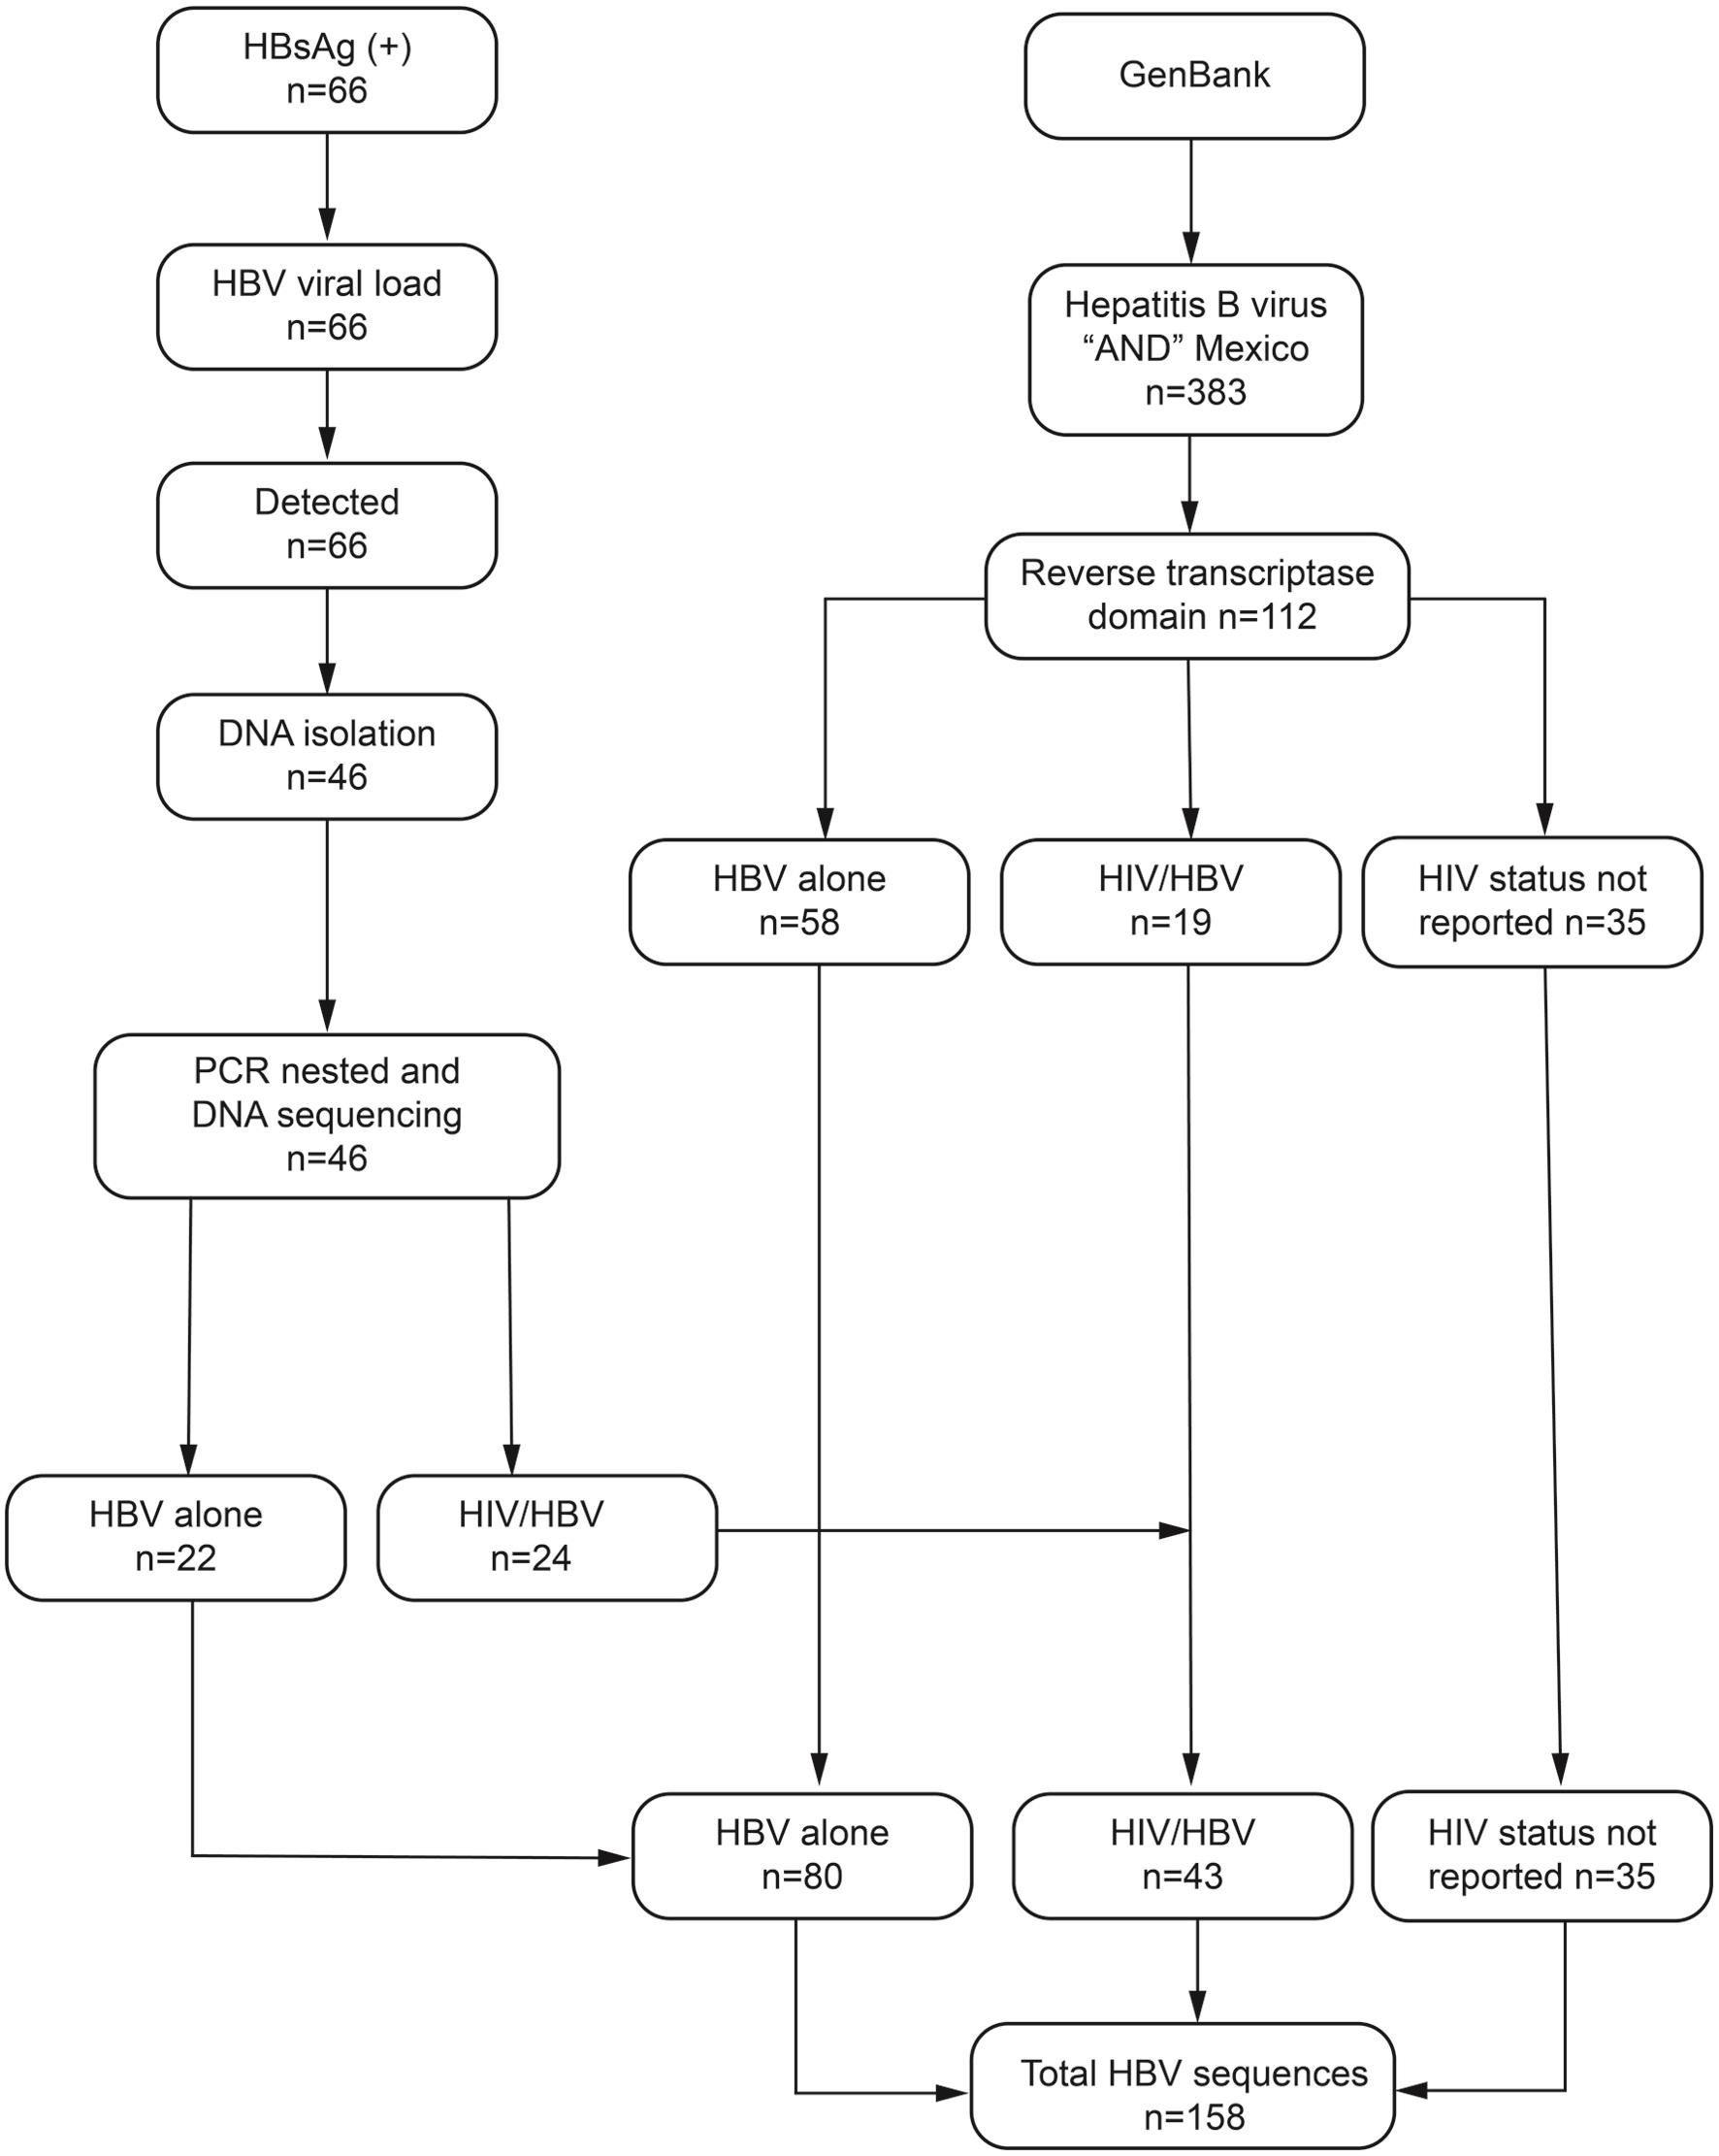 Flow diagram of the enrollment of the HBV sequences analyzed in this study.